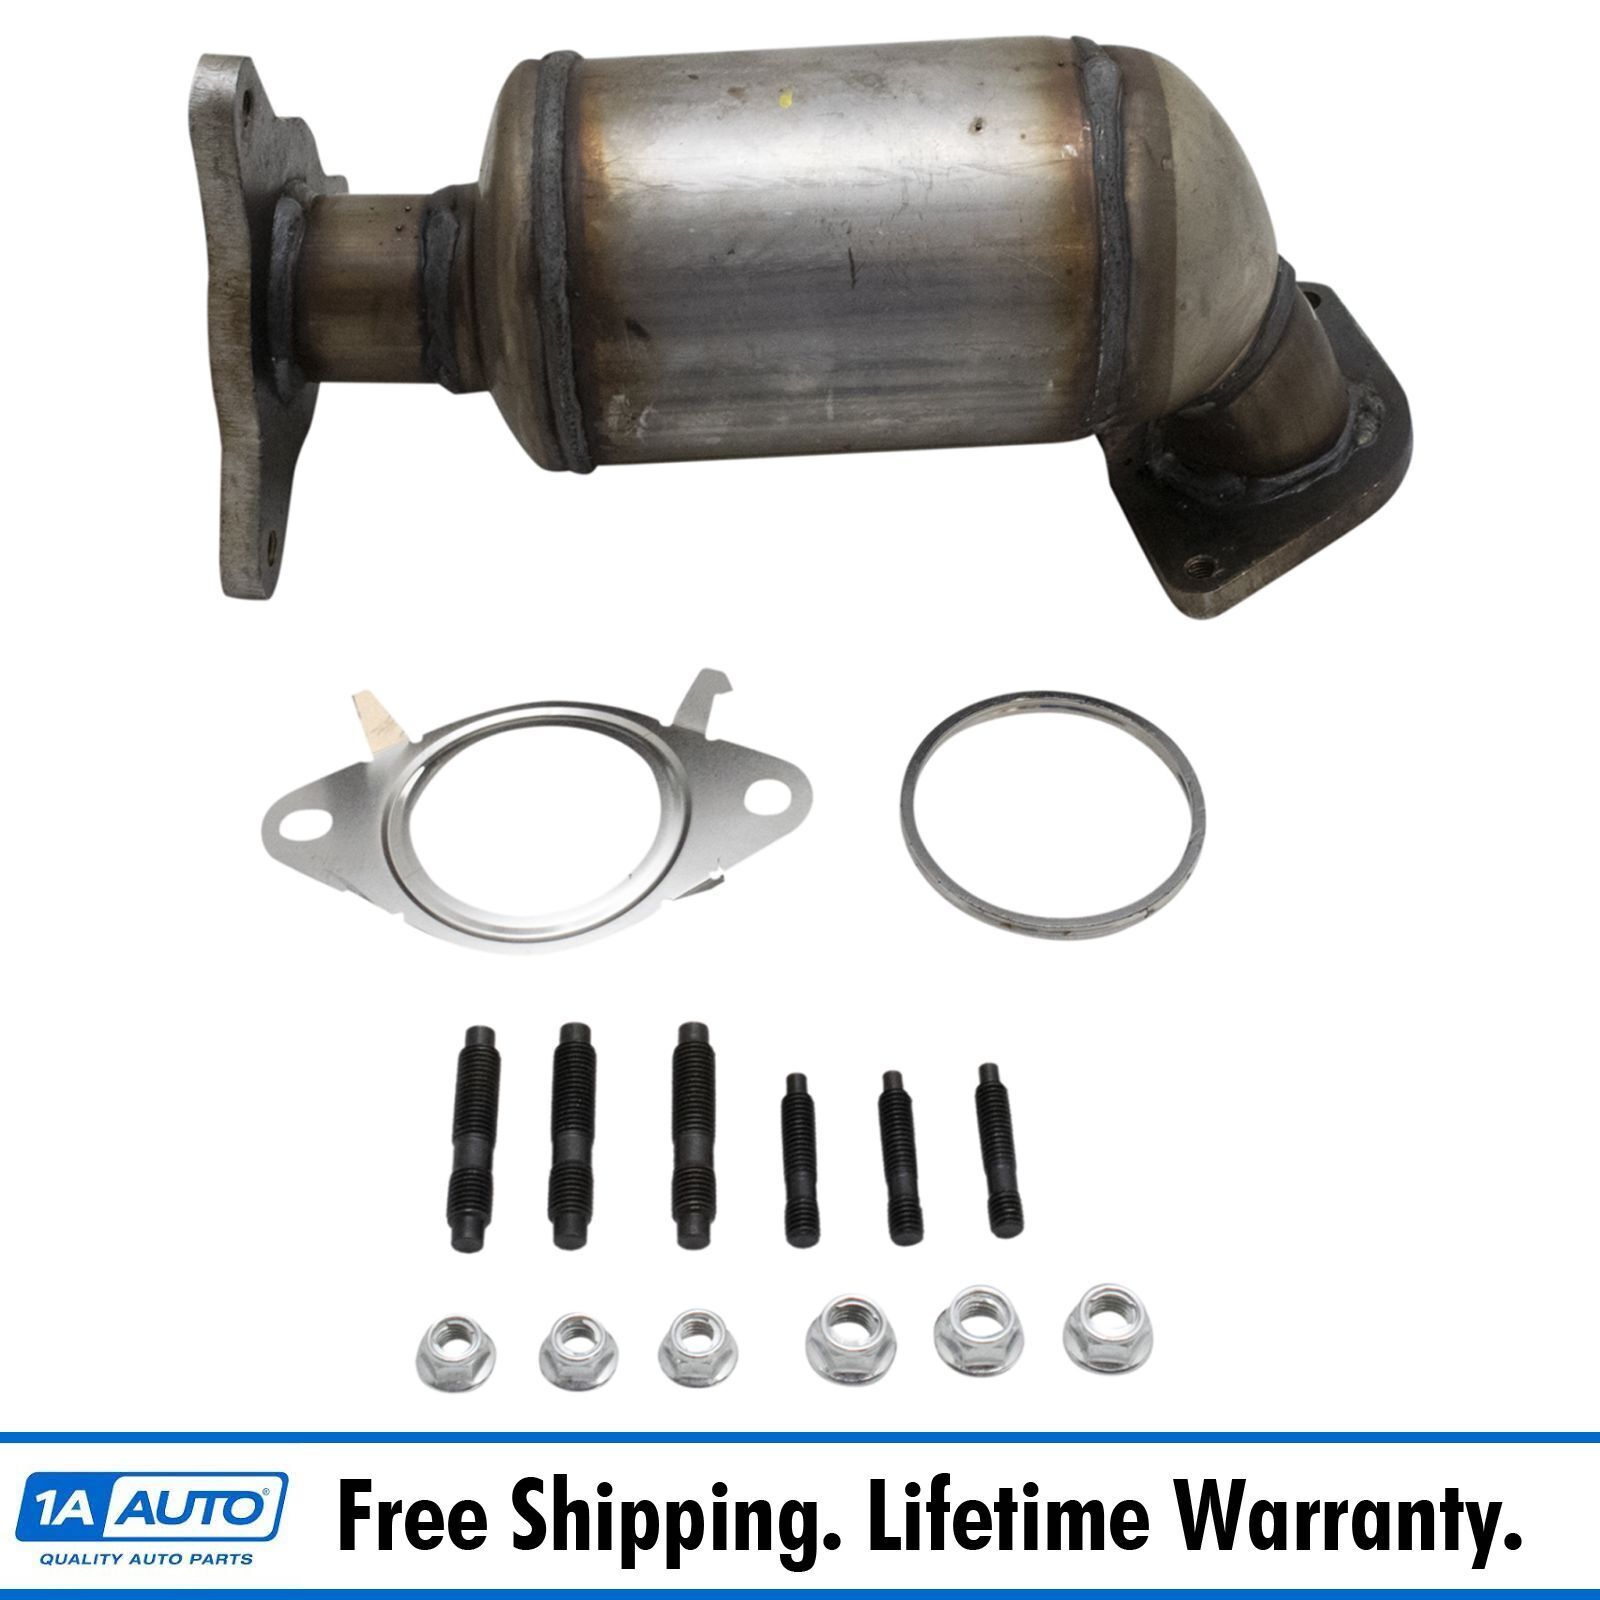 Catalytic Converter Exhaust Pipe w/ Gaskets for Envision Impala Malibu L4 2.5L